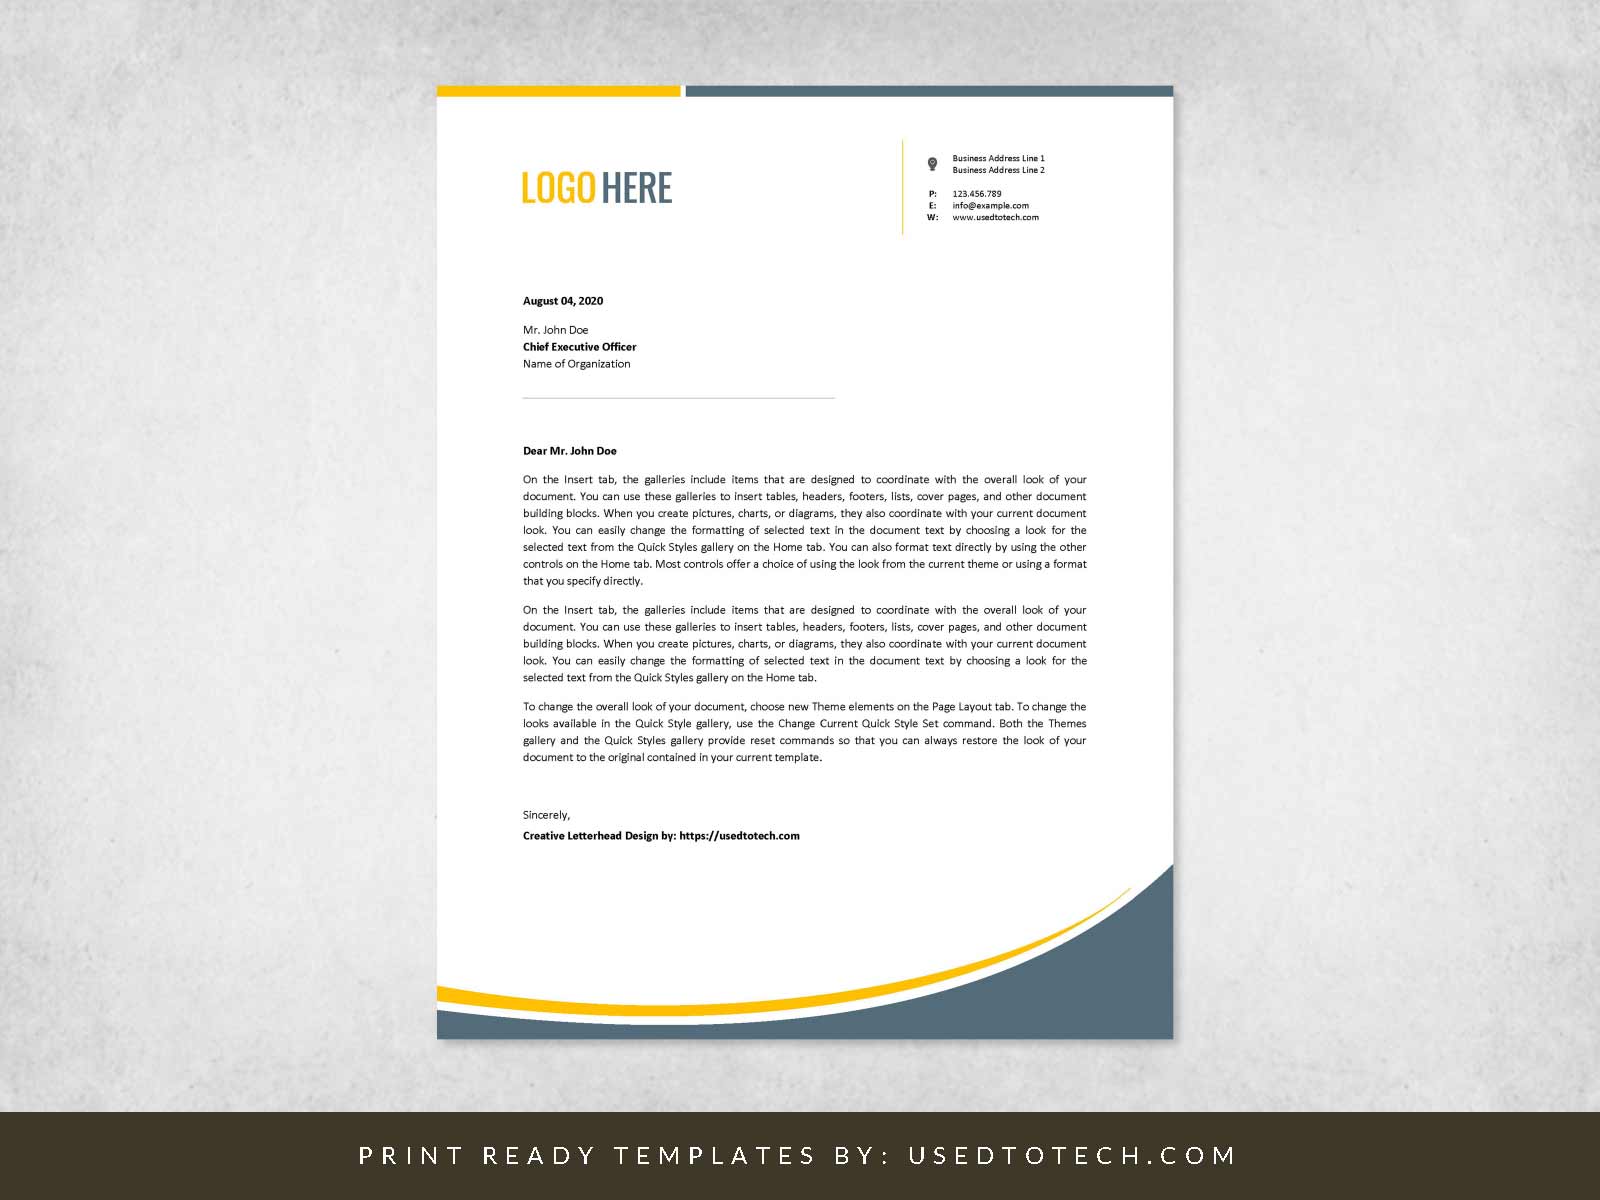 Word template for creative letterhead design - Used to Tech Inside Header Templates For Word